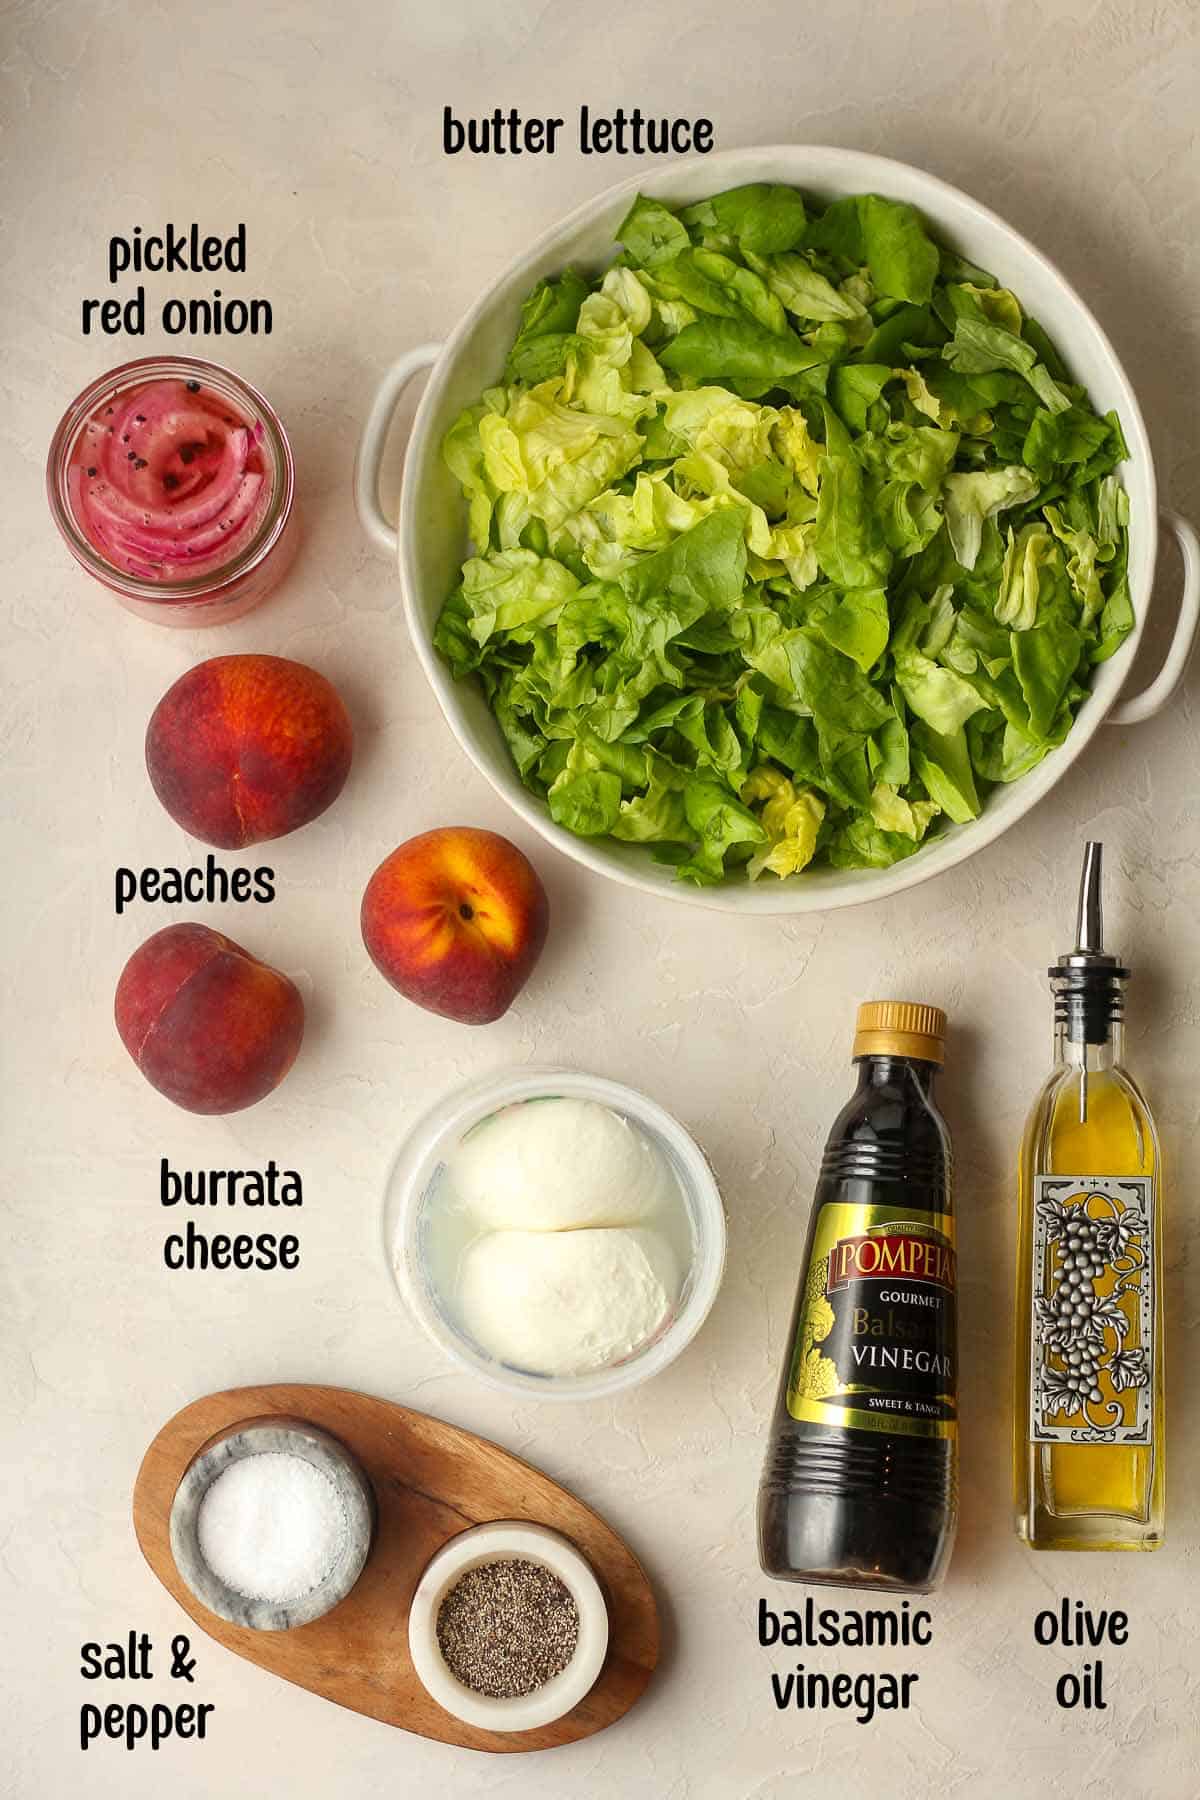 The labeled ingredients for the peach burrata salad.